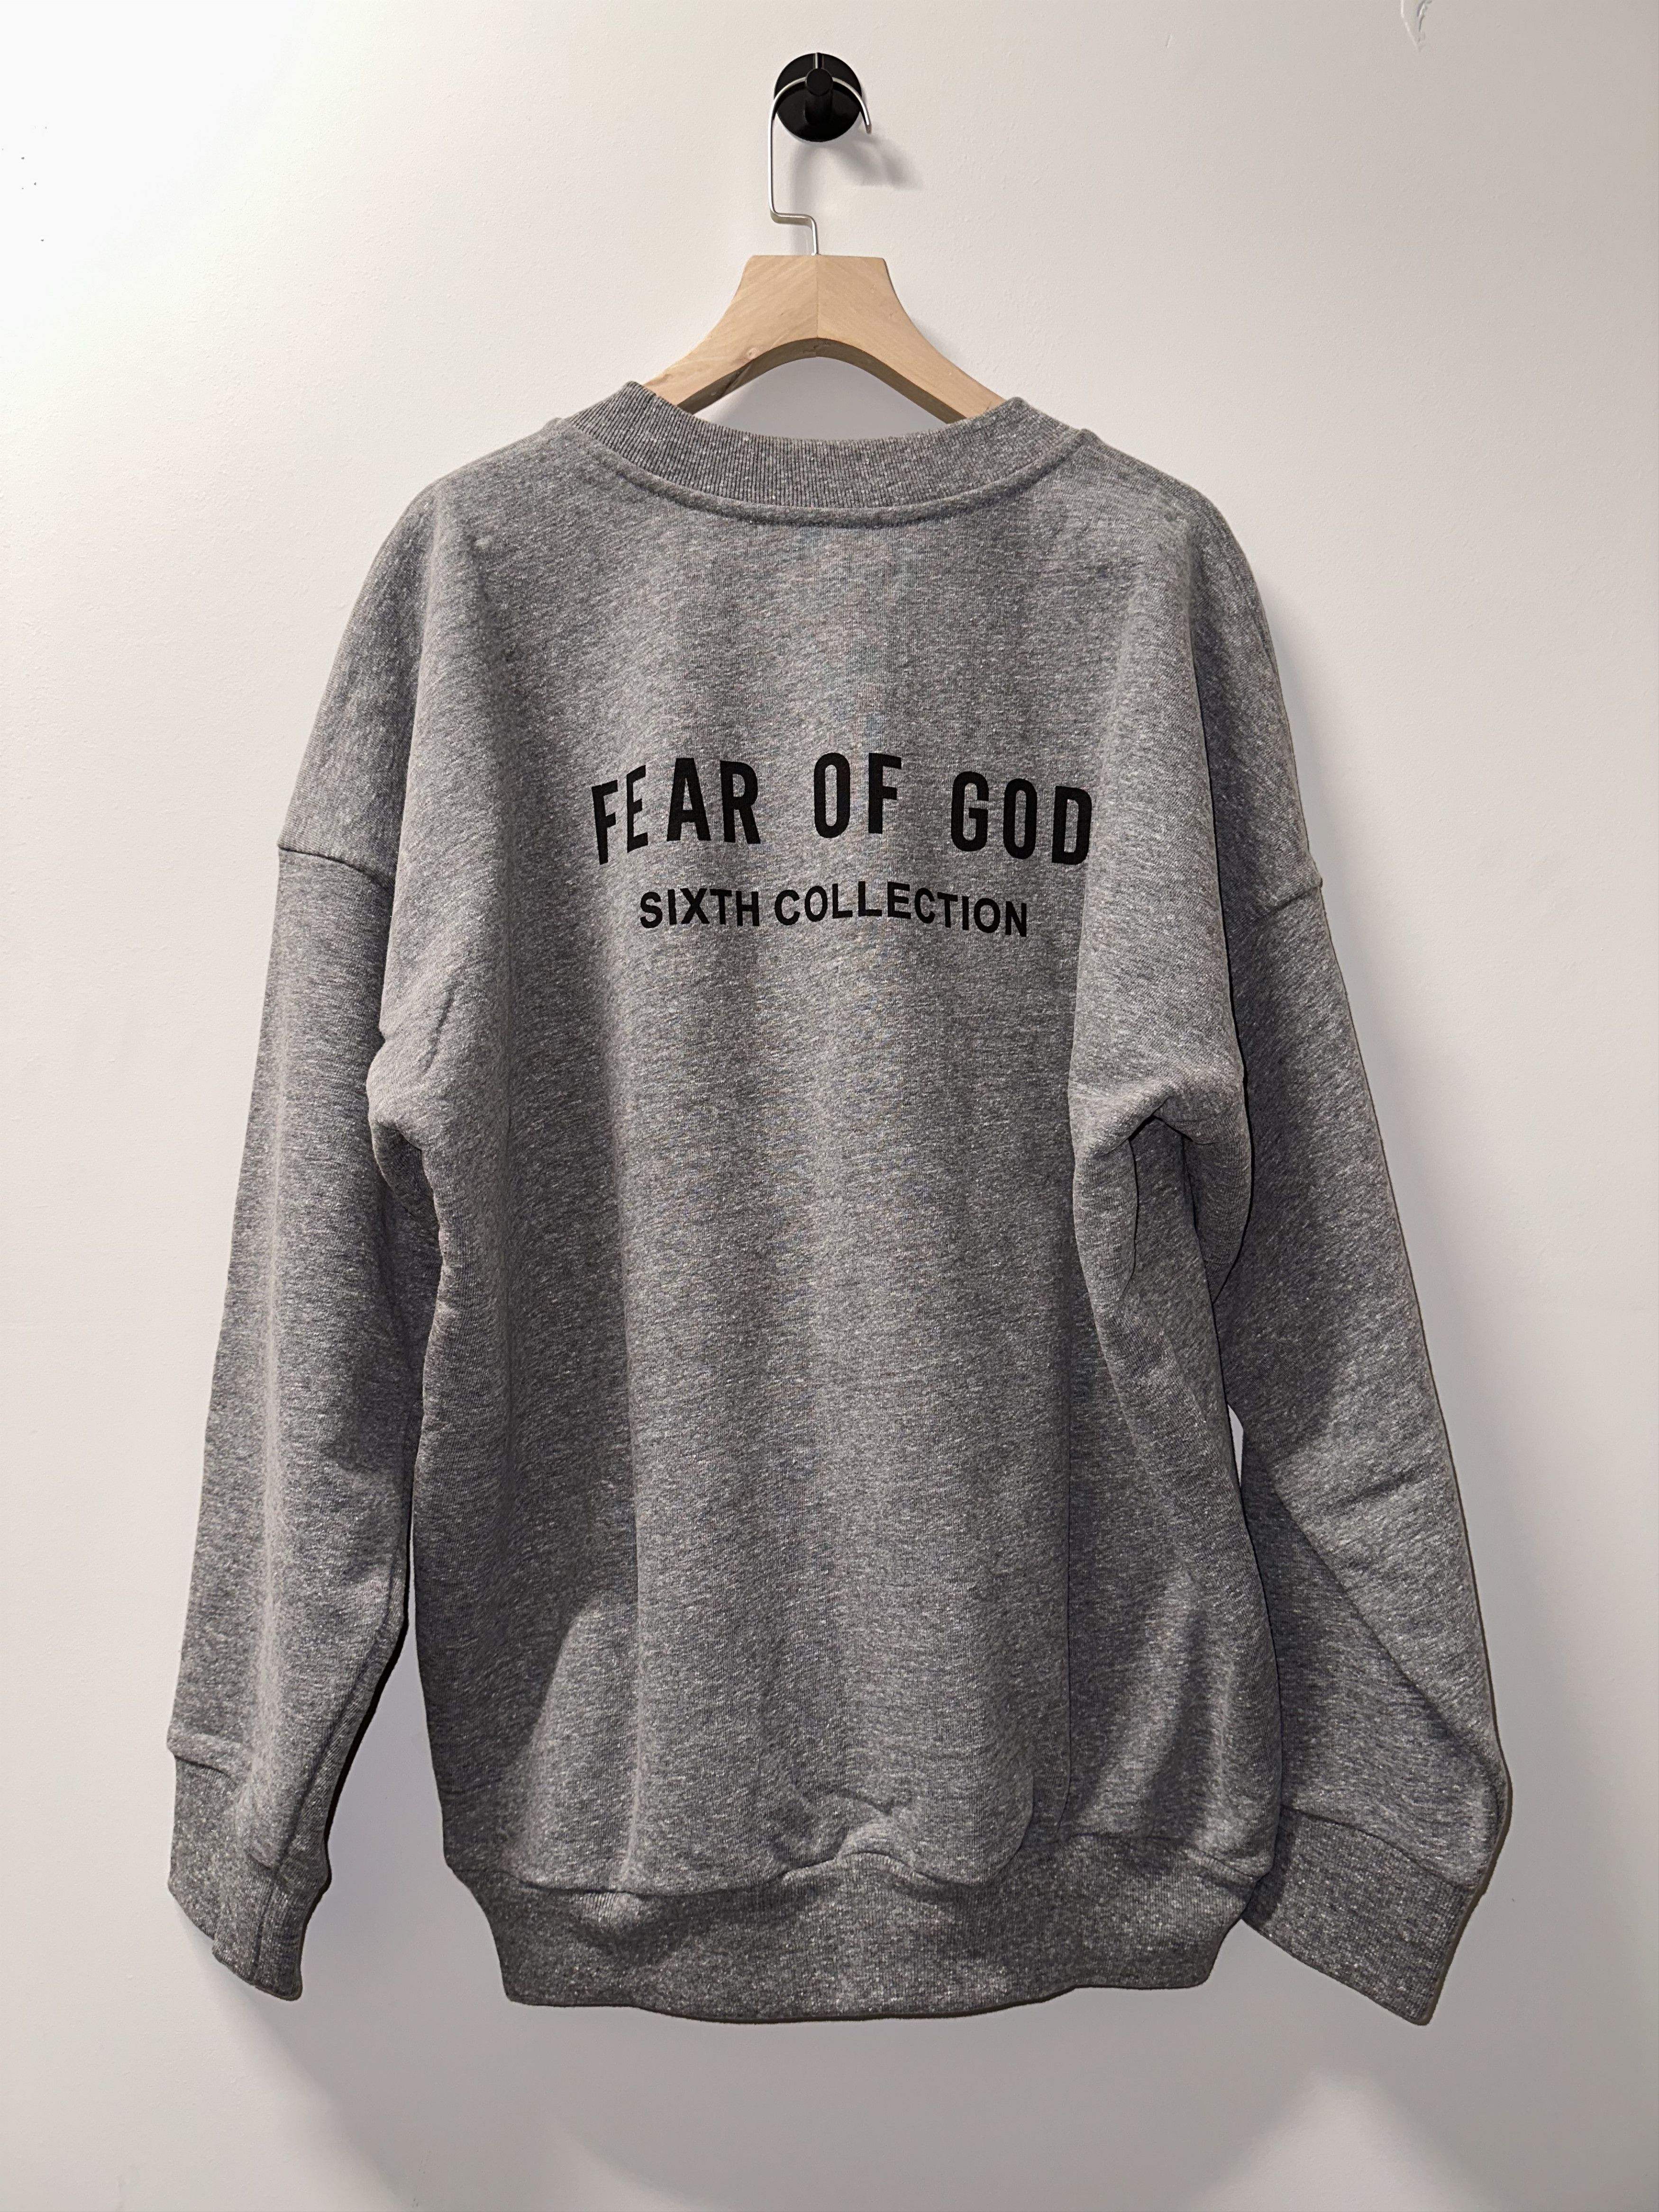 Fear Of God Sixth Collection | Grailed